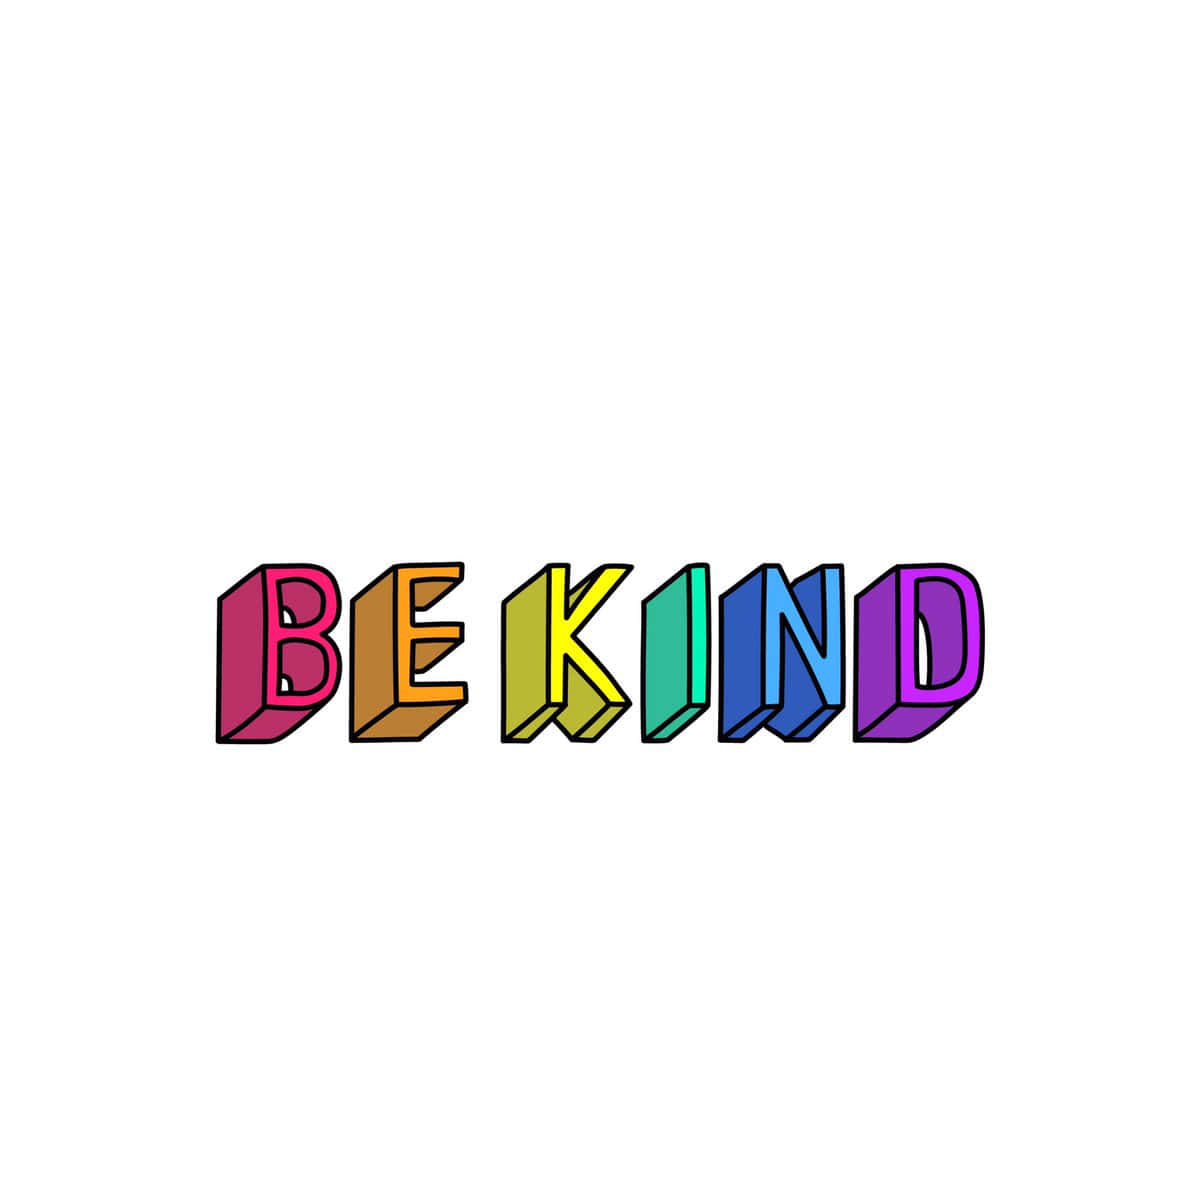 88 Best Quotes About Kindness To Make the World Better